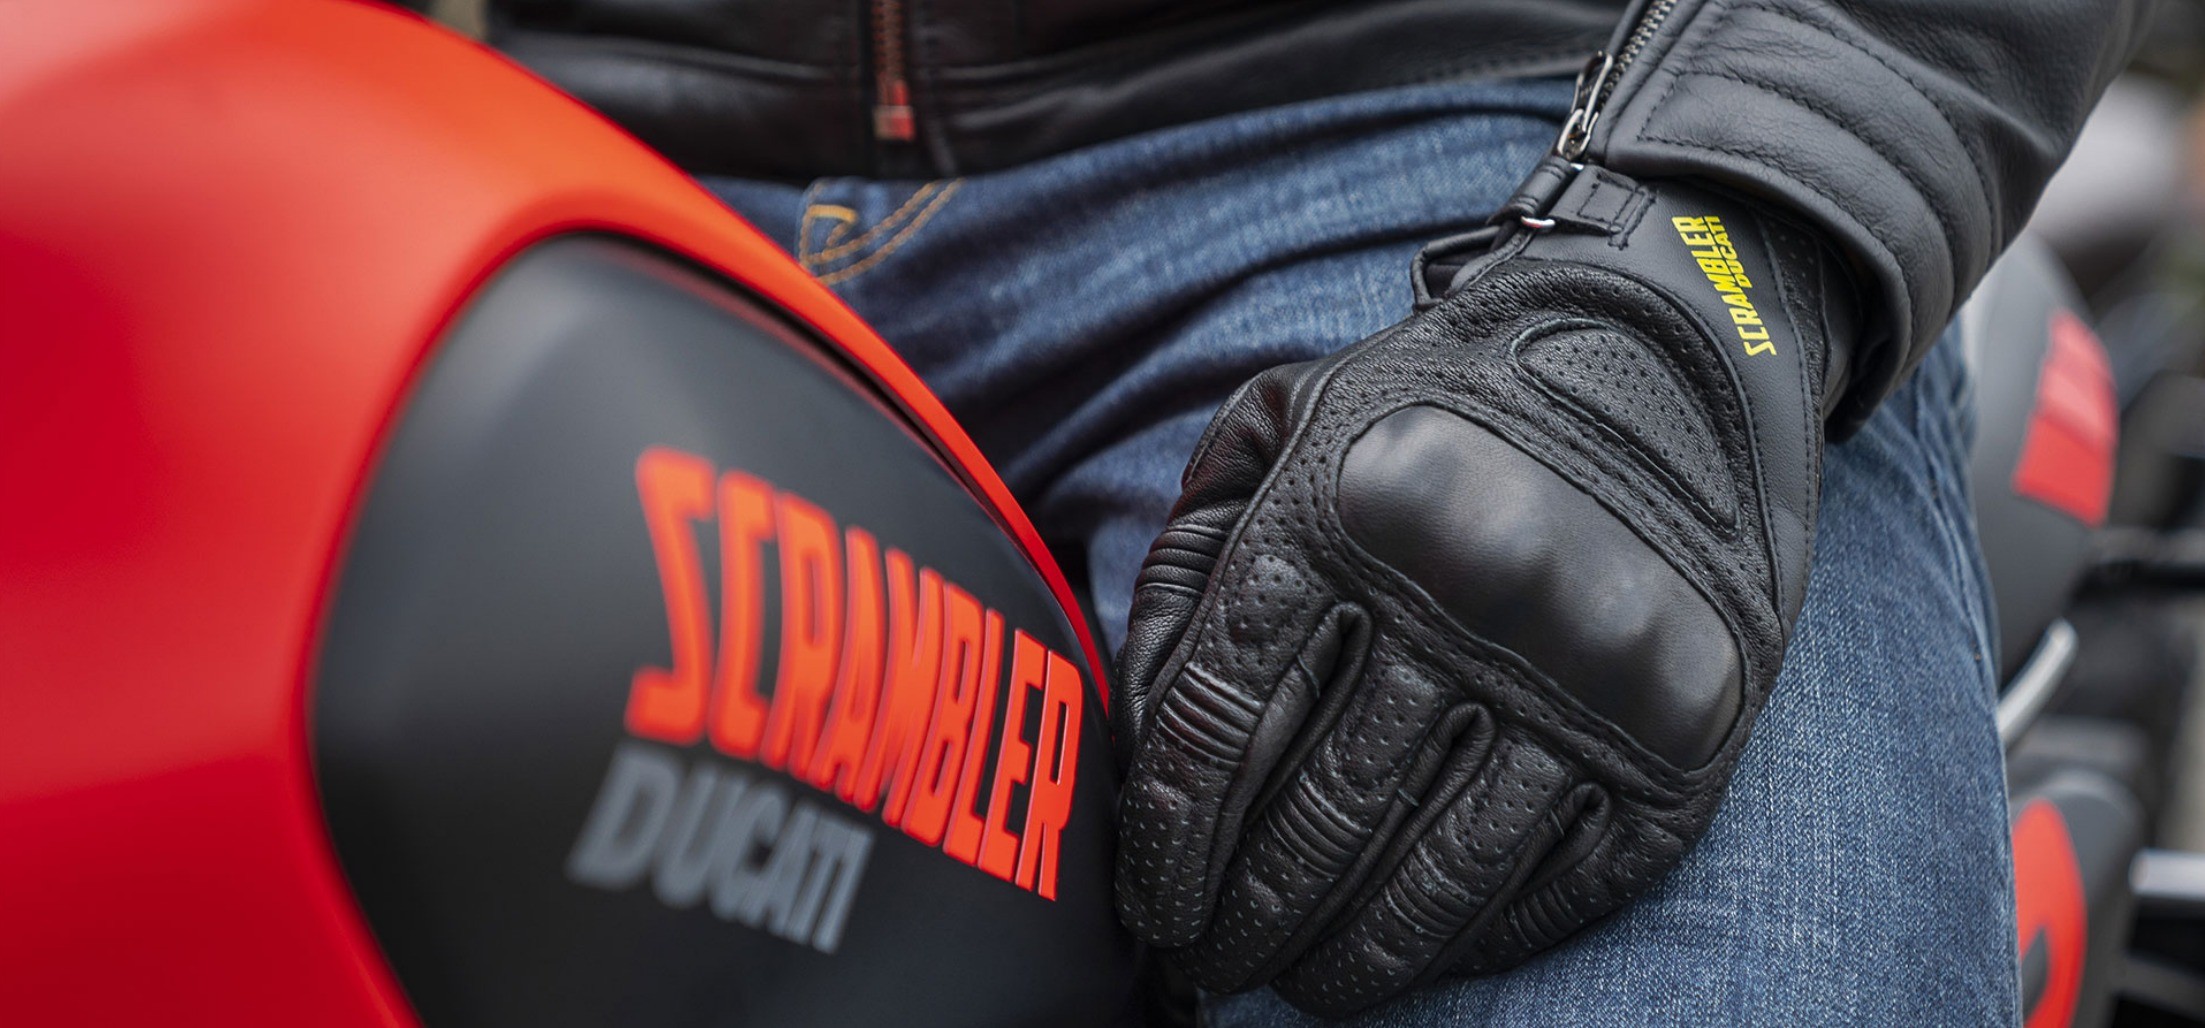 The new Ducati Scrambler apparel collection arrives in stores